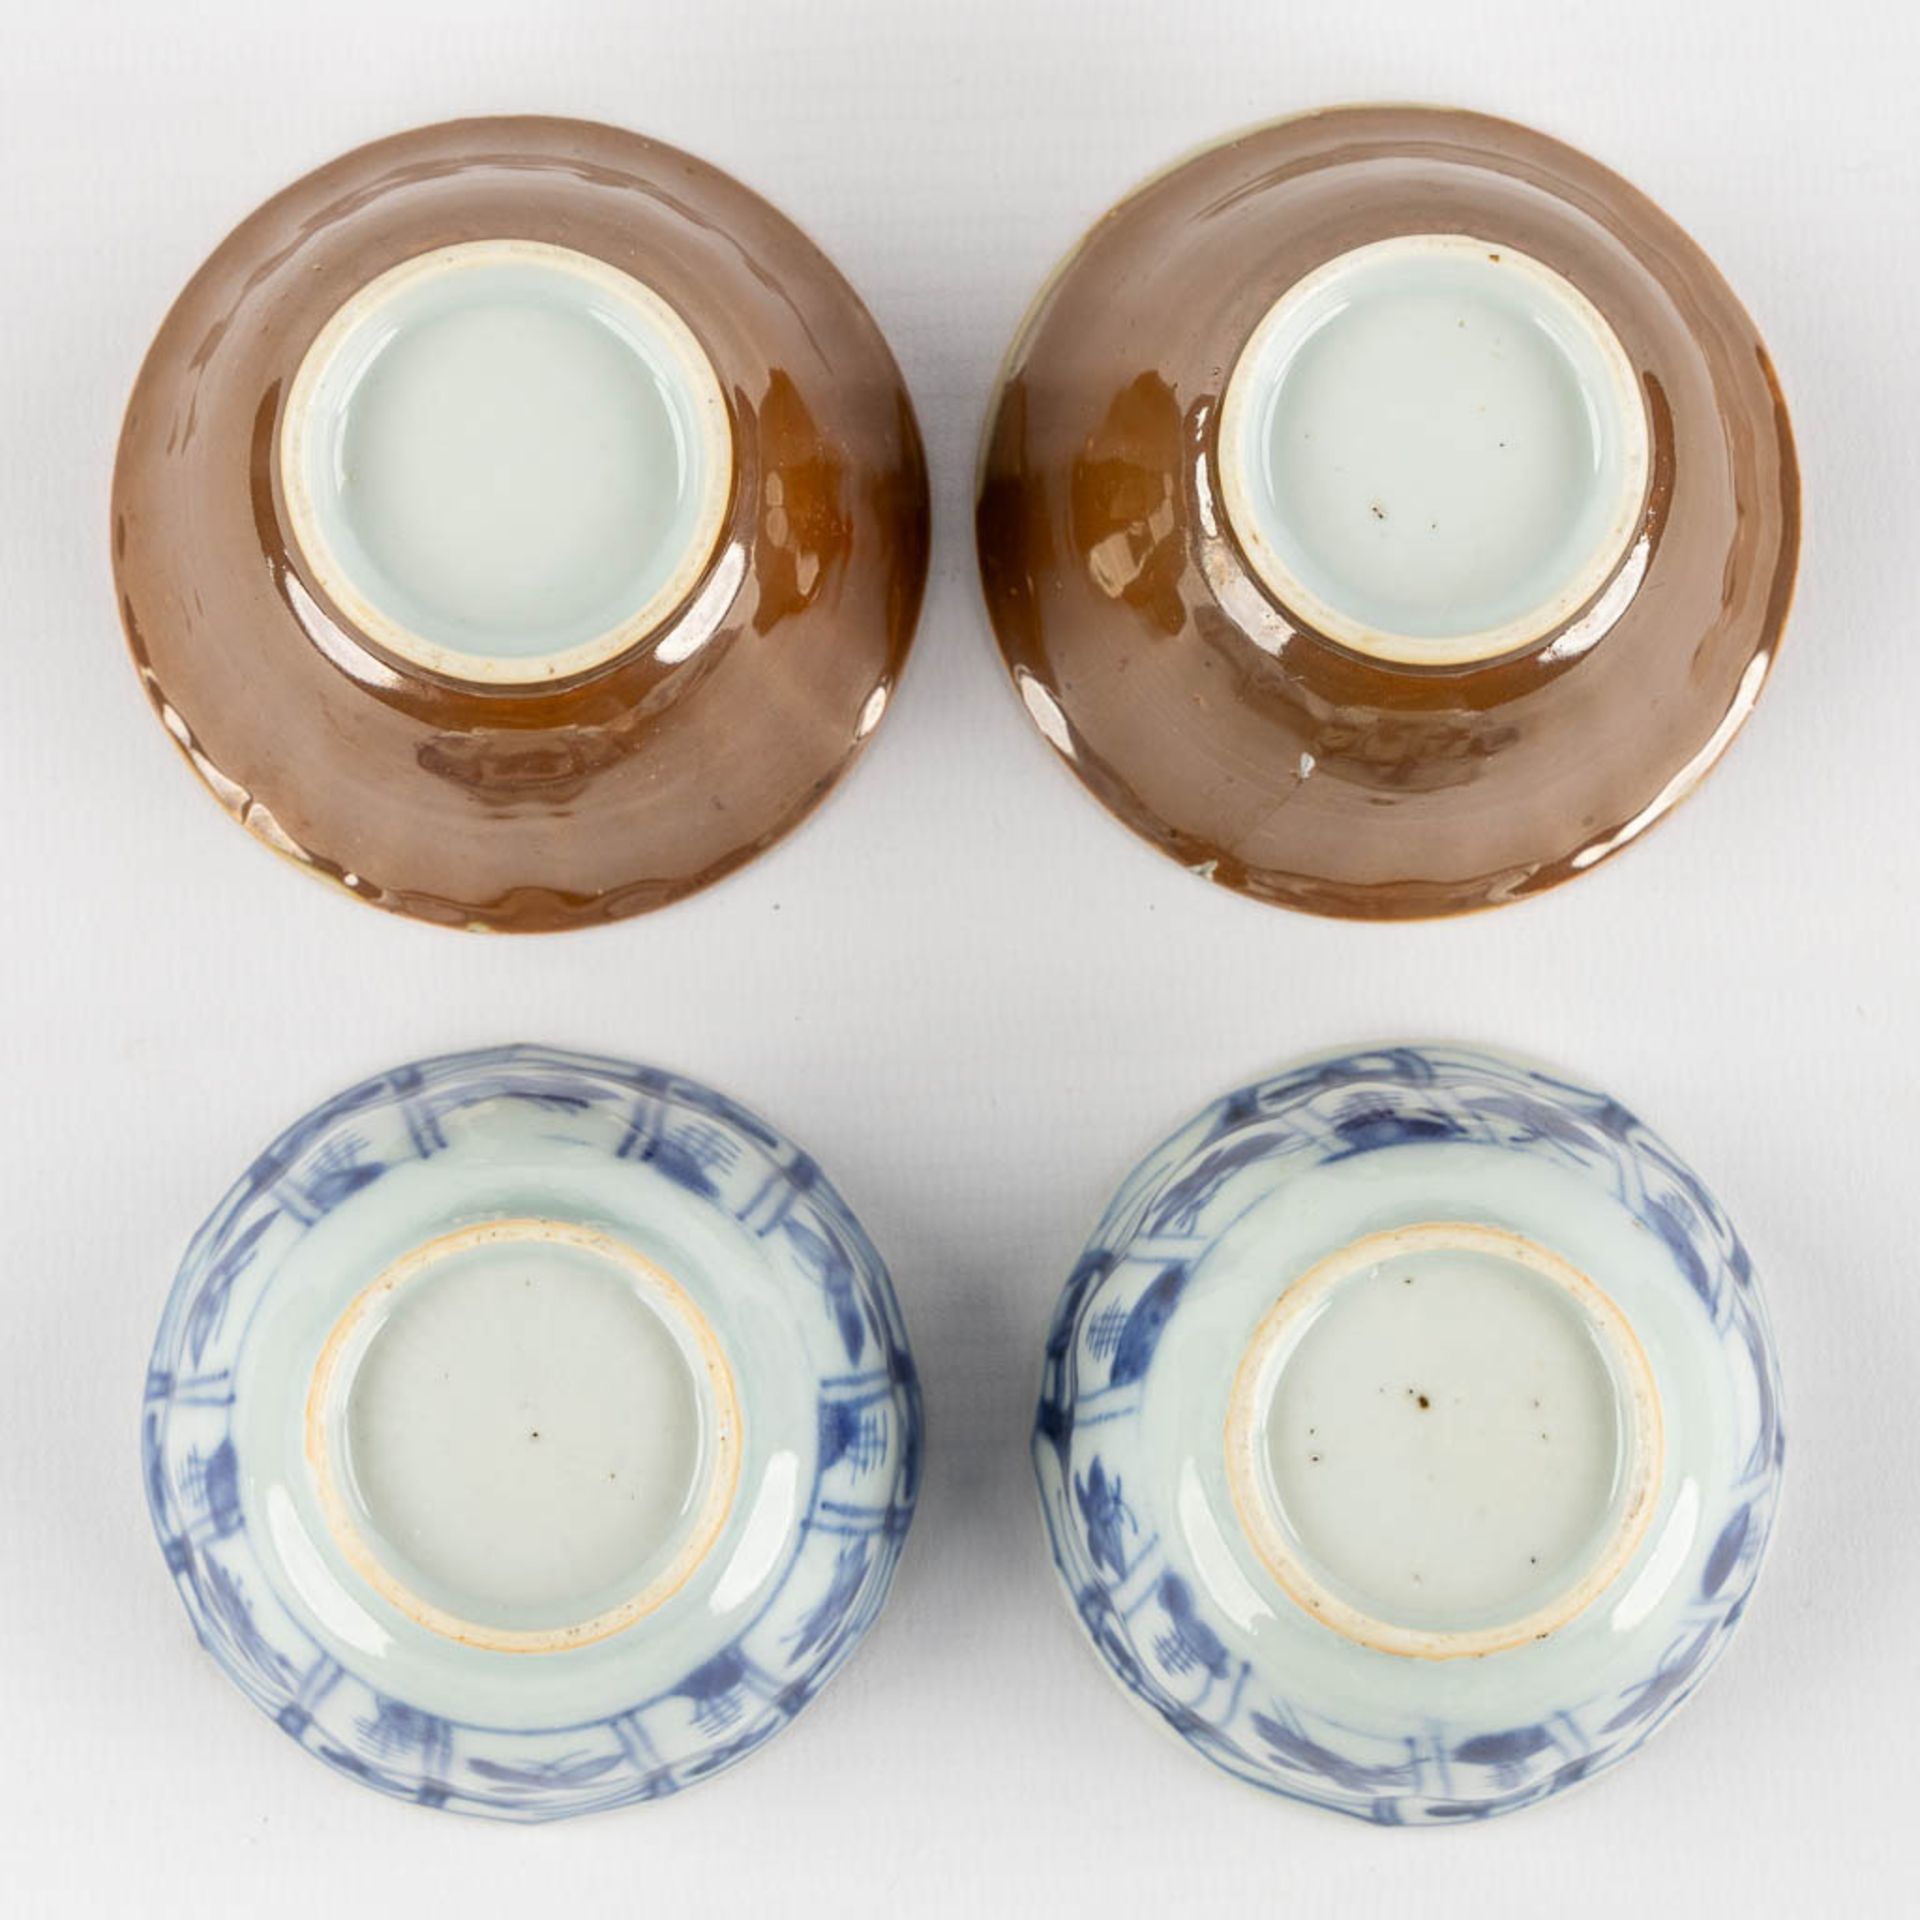 Fifteen Chinese cups, saucers and plates, blue white and Famille Roze. (D:23,4 cm) - Image 14 of 15